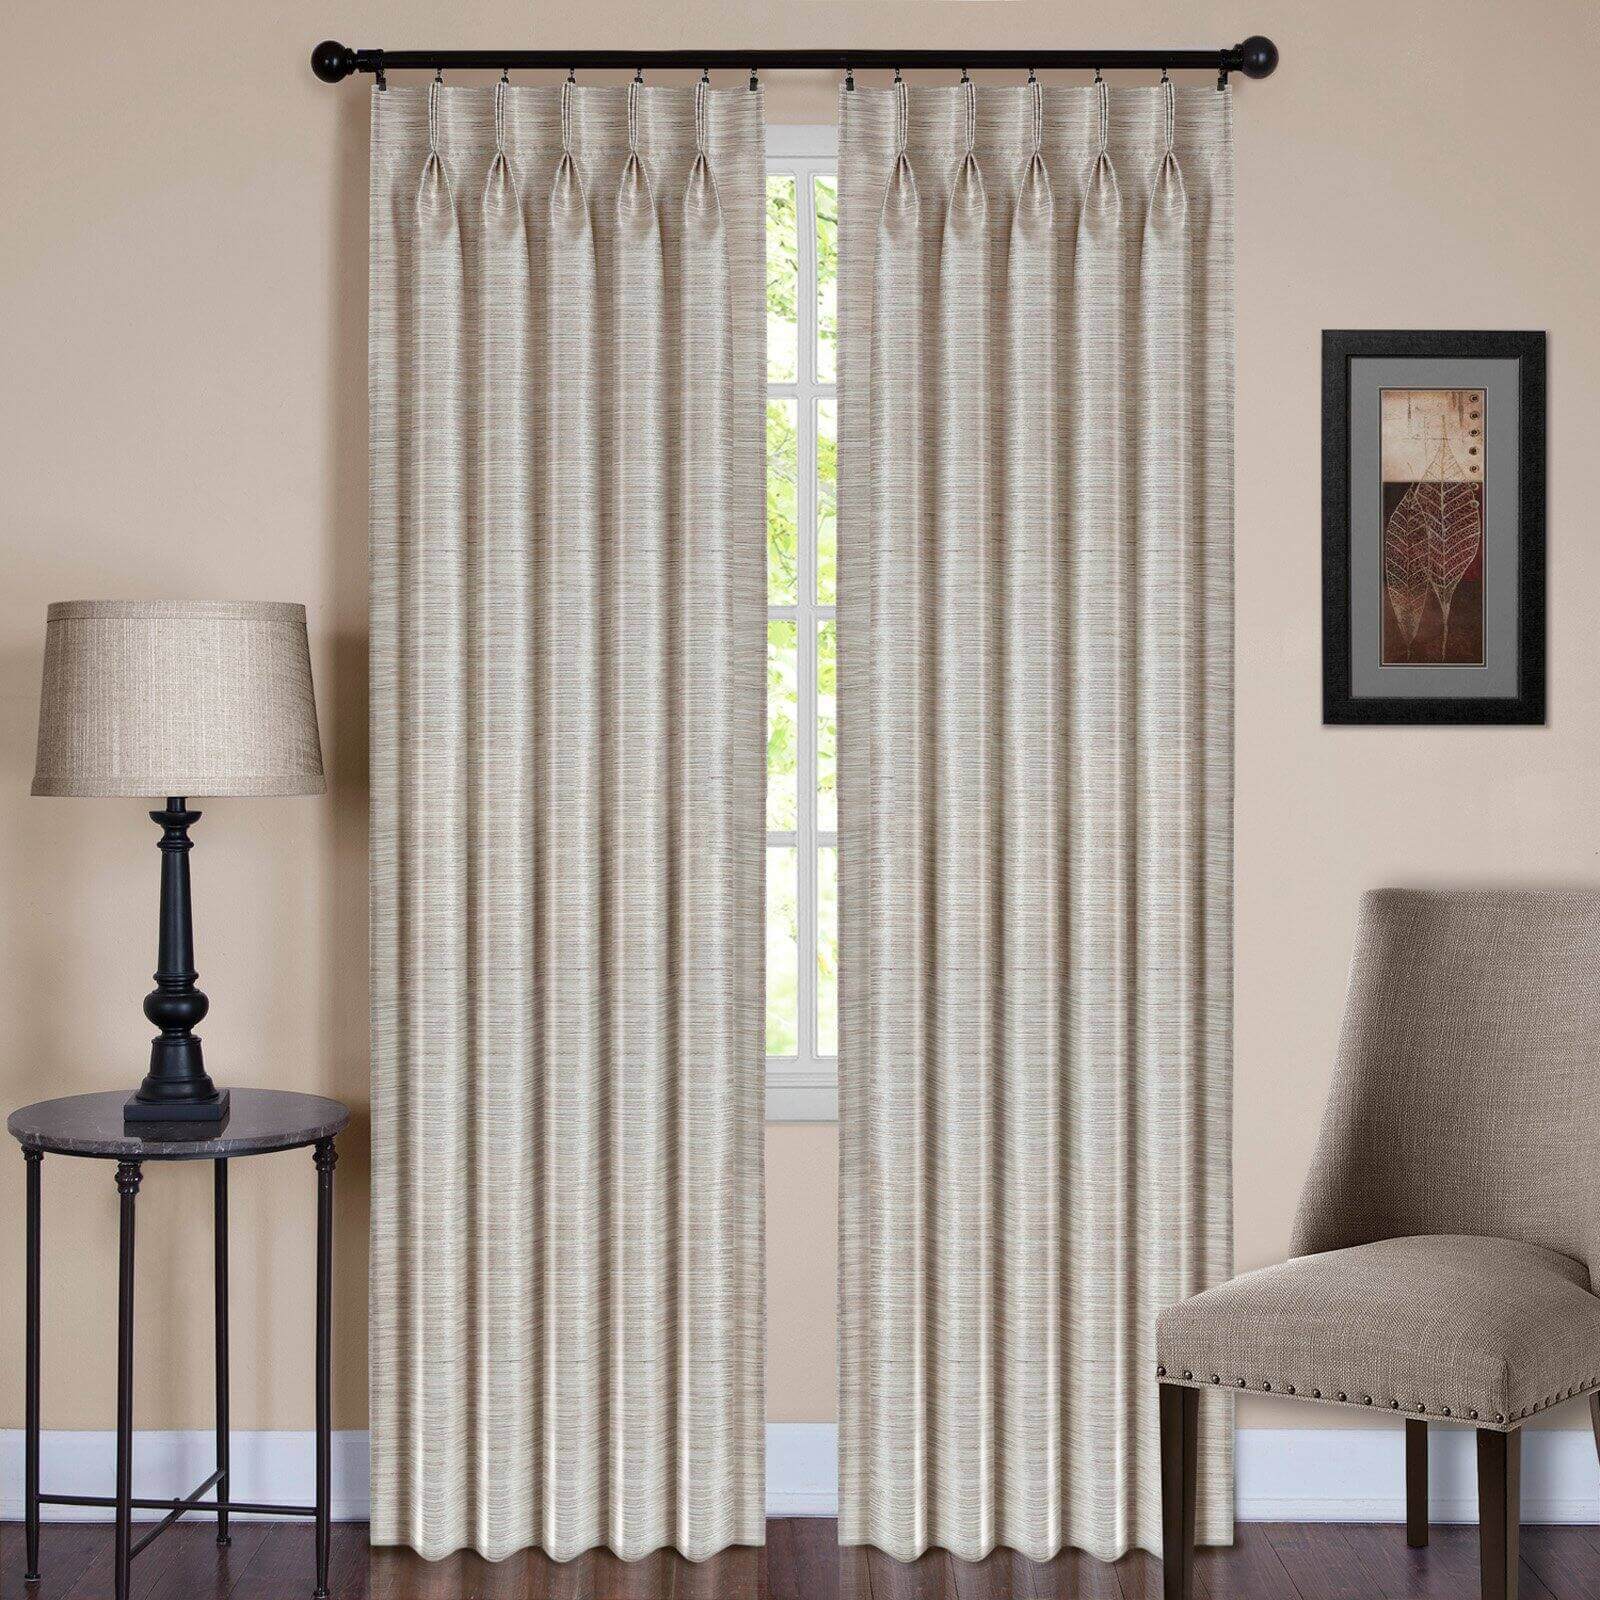 Why Choose Commercial Pinch Pleat Curtains by Country